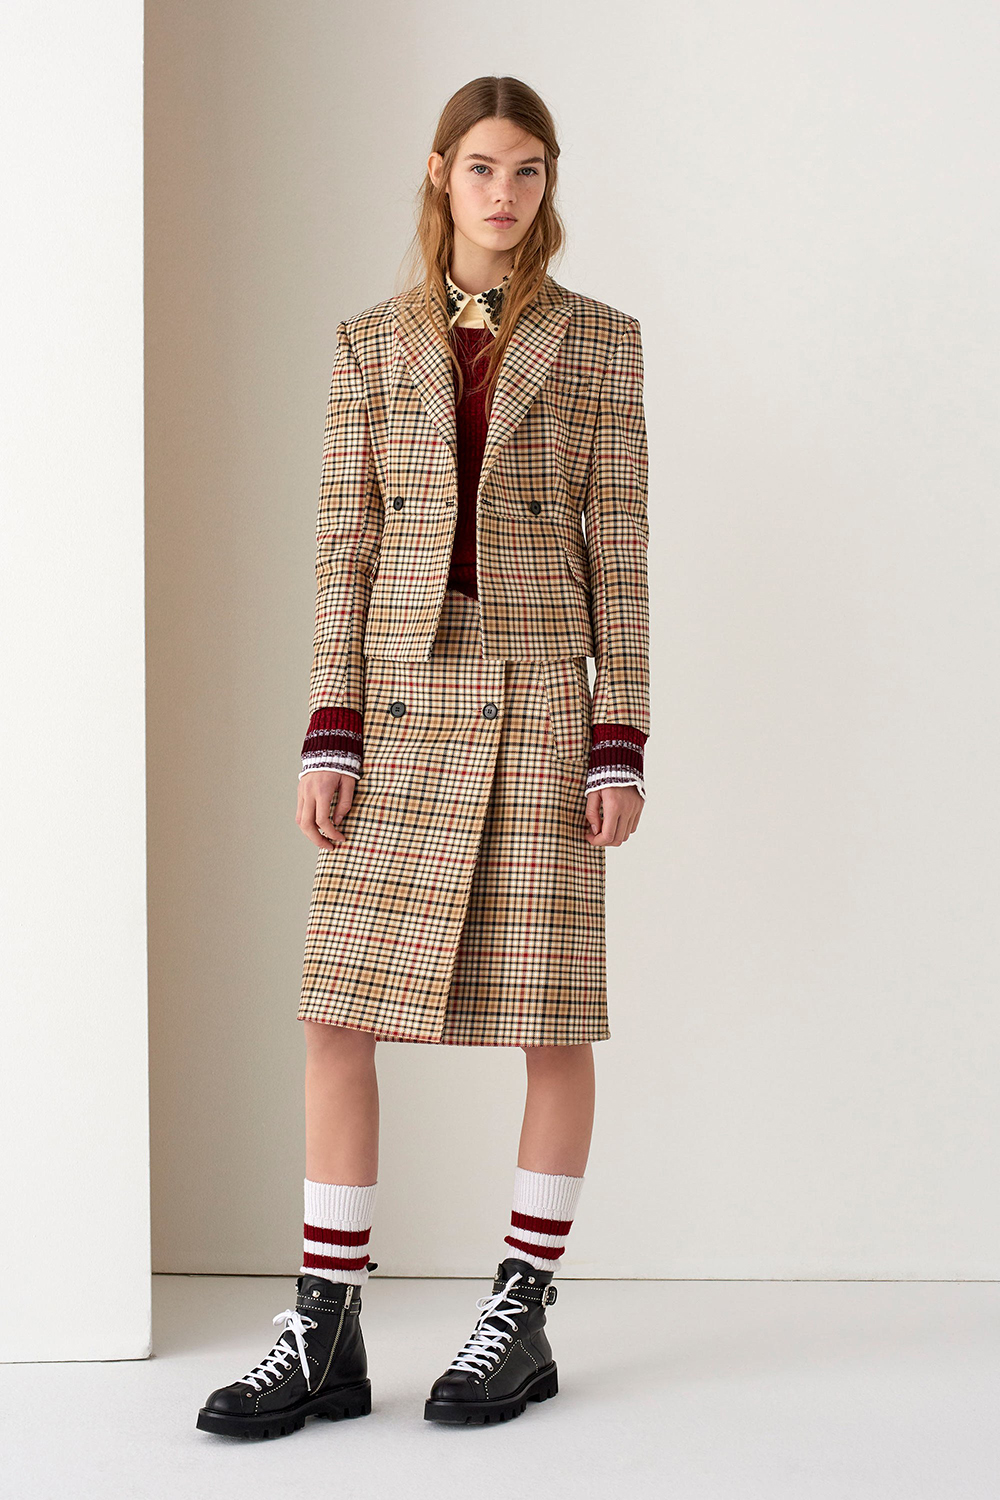 Dondup Pre-Fall 2018 – Honestly WTF